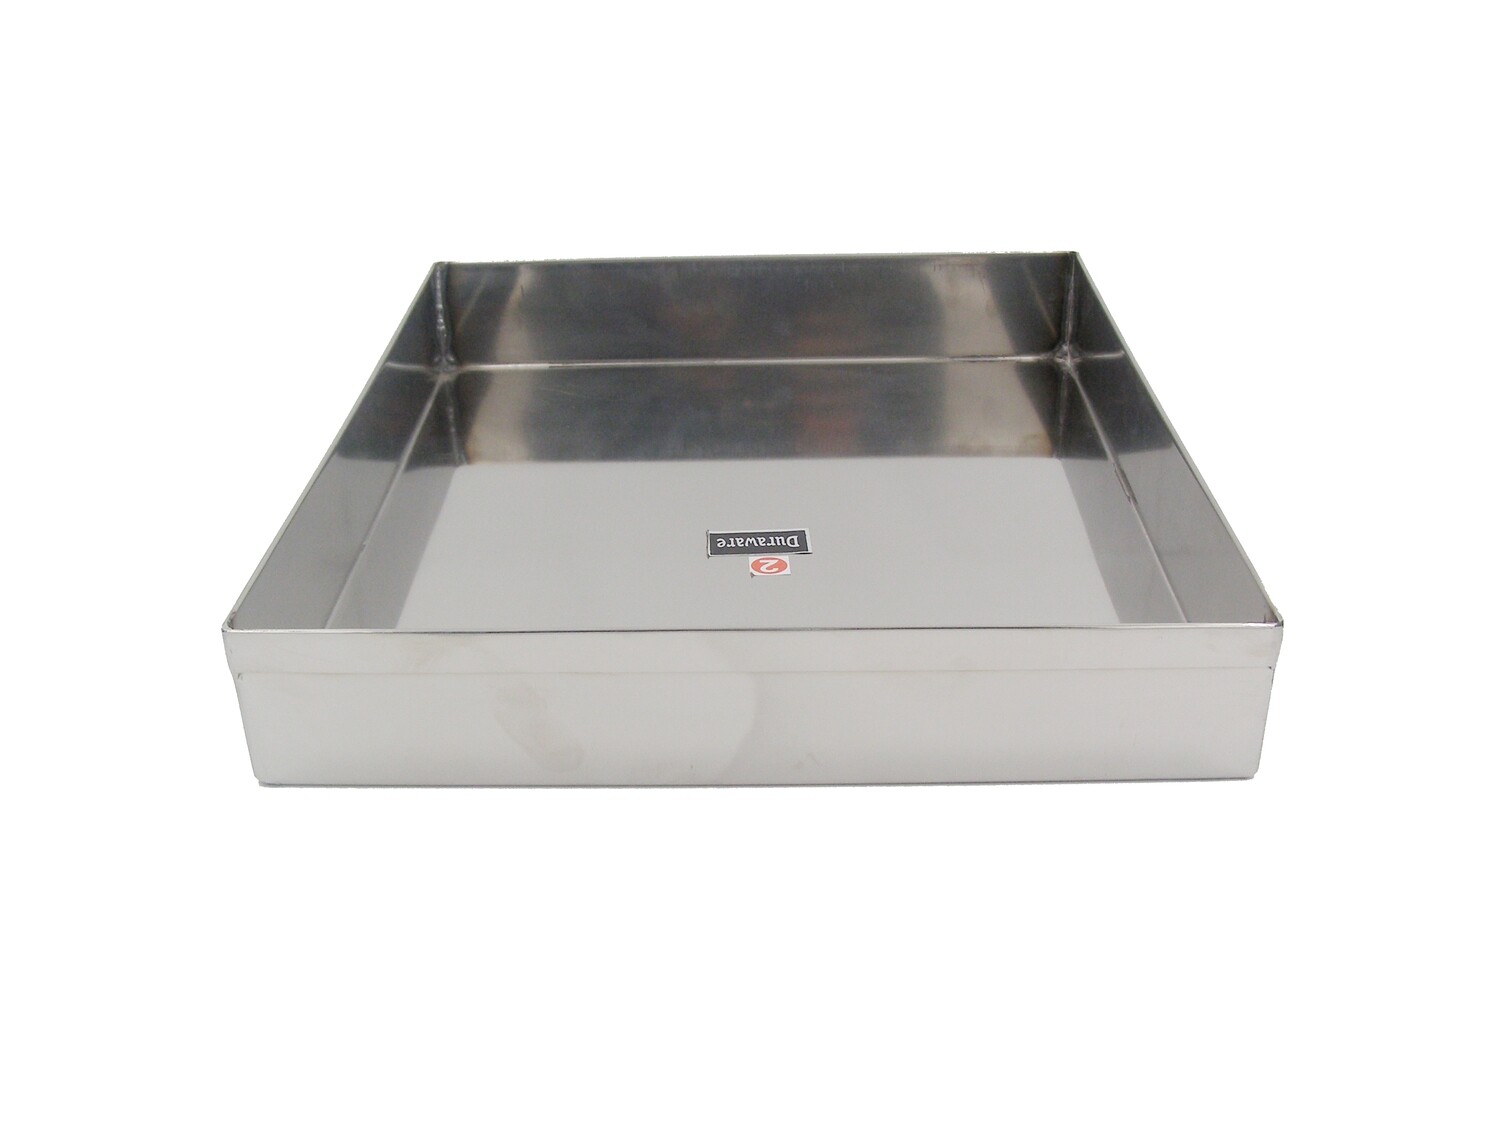 WELCOME/DURAWARE SS 36X40CM SWEET TRAY NO3